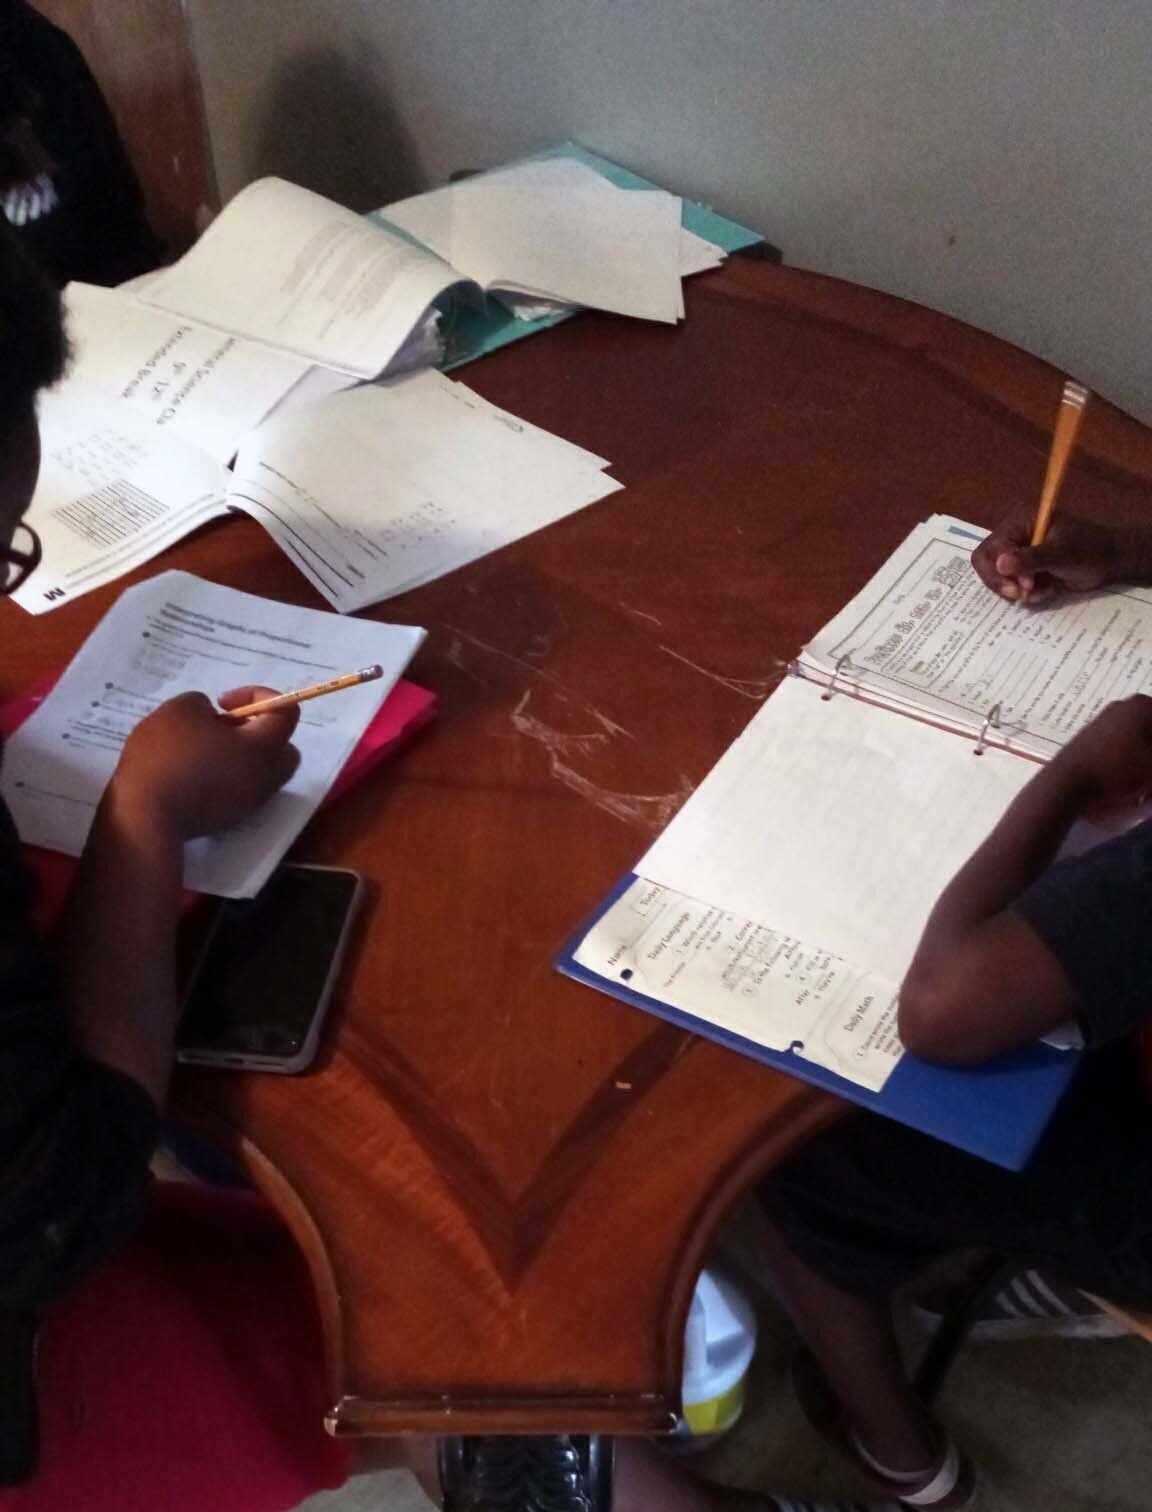 Amareon, right, and his sister Jakayla work on assignments picked up from their local school district. Their family does not have a computer or broadband Internet at home, so the siblings have to take turns sharing their mom’s phone to access online lessons.